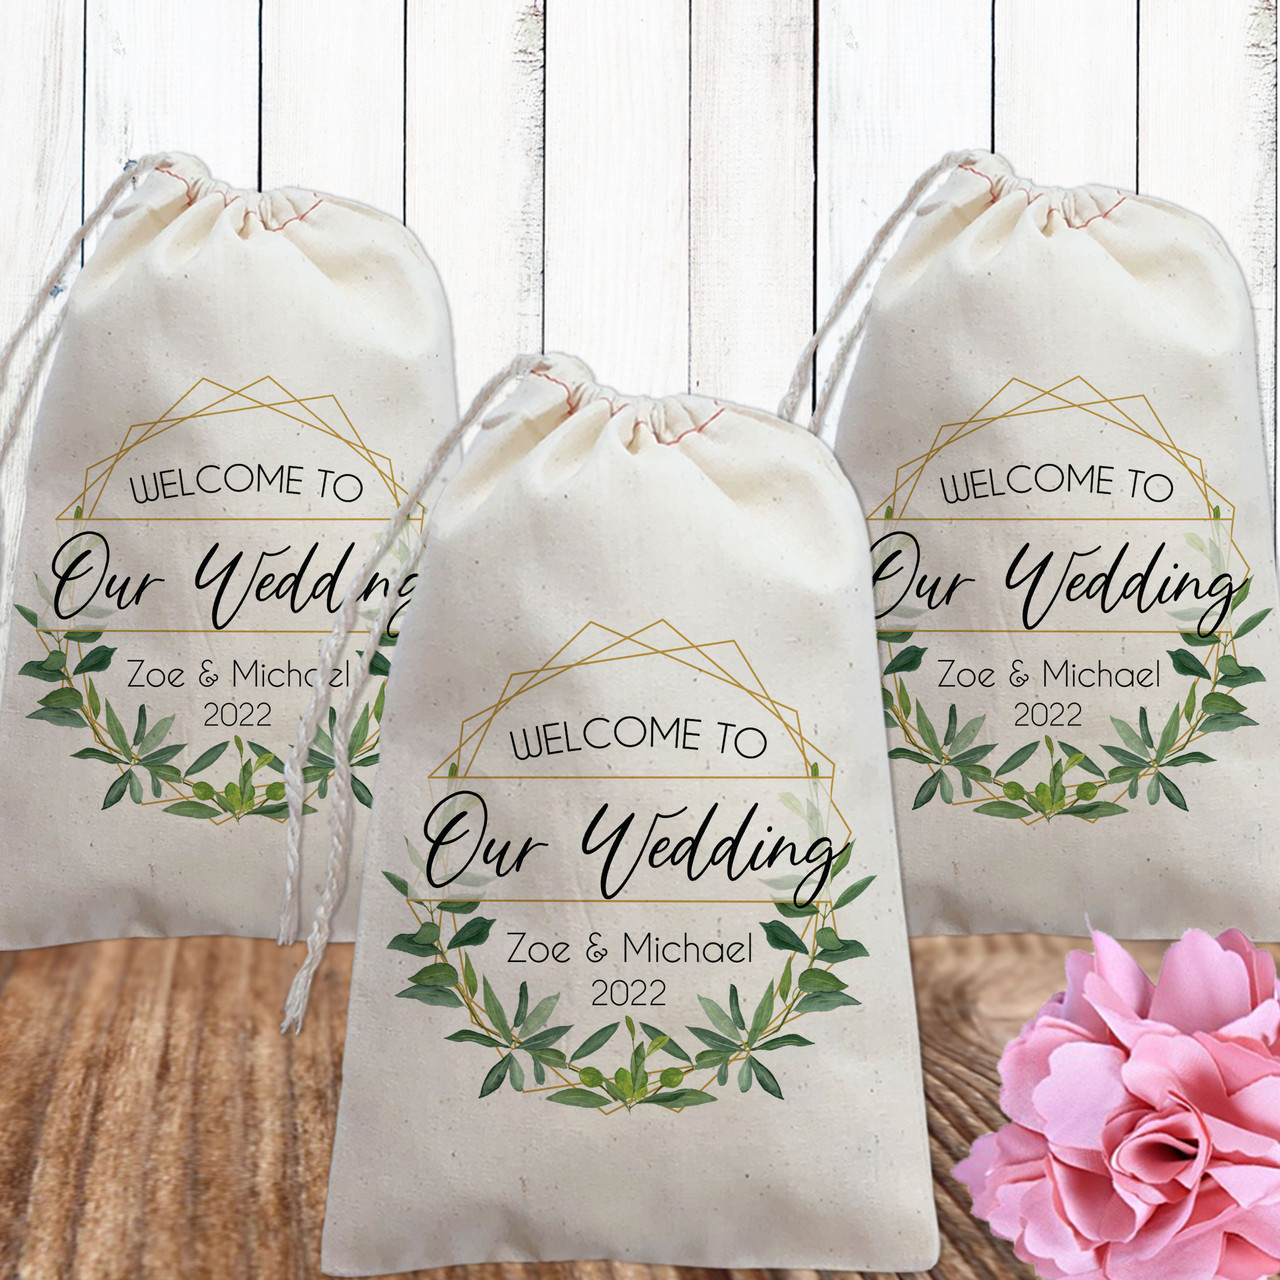 https://cdn11.bigcommerce.com/s-5grzuu6/images/stencil/1280w/products/4900/45619/Gold_Greenery-Canvas_Fabric_Wedding_Welcome_Favor_Bags__77591.1681854753.jpg